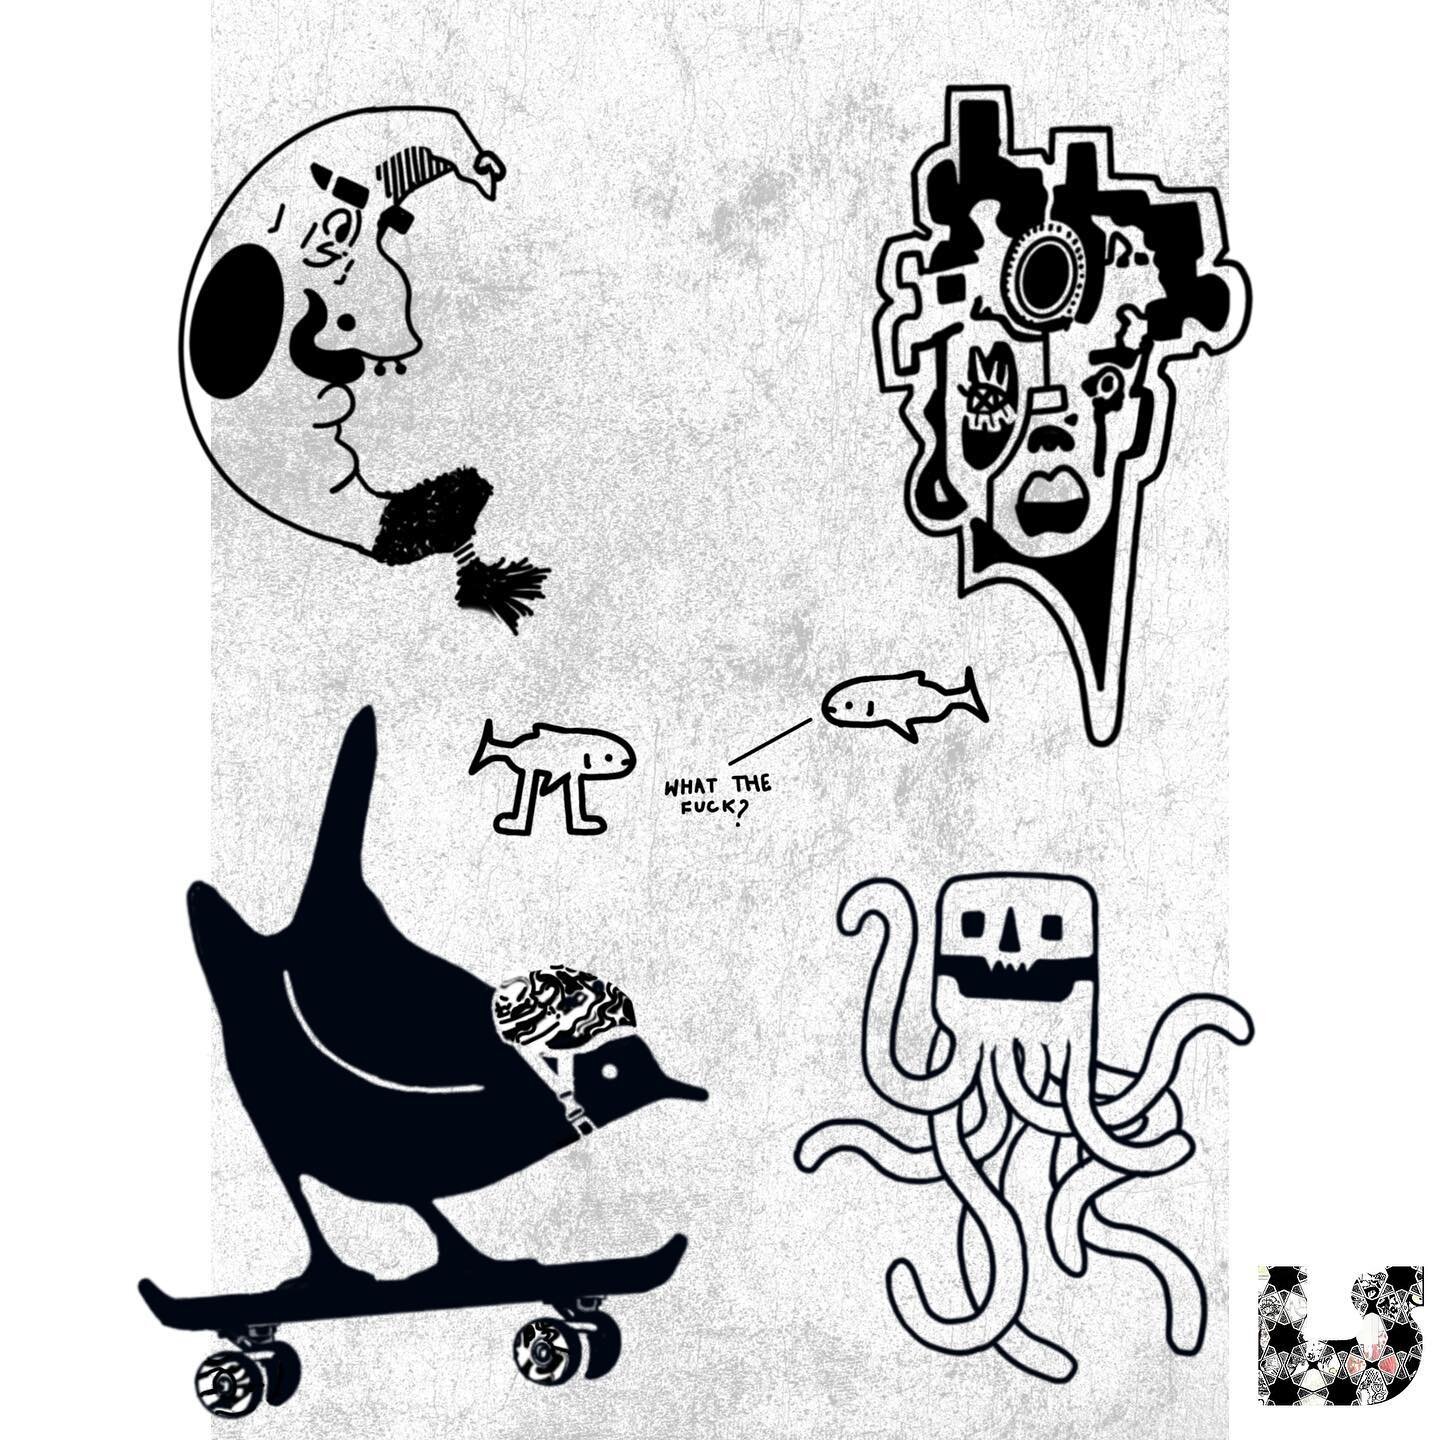 Tattoo flash sheet #3 😎

Was working on this before my apprenticeship where I found out how difficult tattooing was 💀

This is the kind of flash I would love to be taking on as a tattoo artist in about a year or two :) 

Expect to see a healthy mix